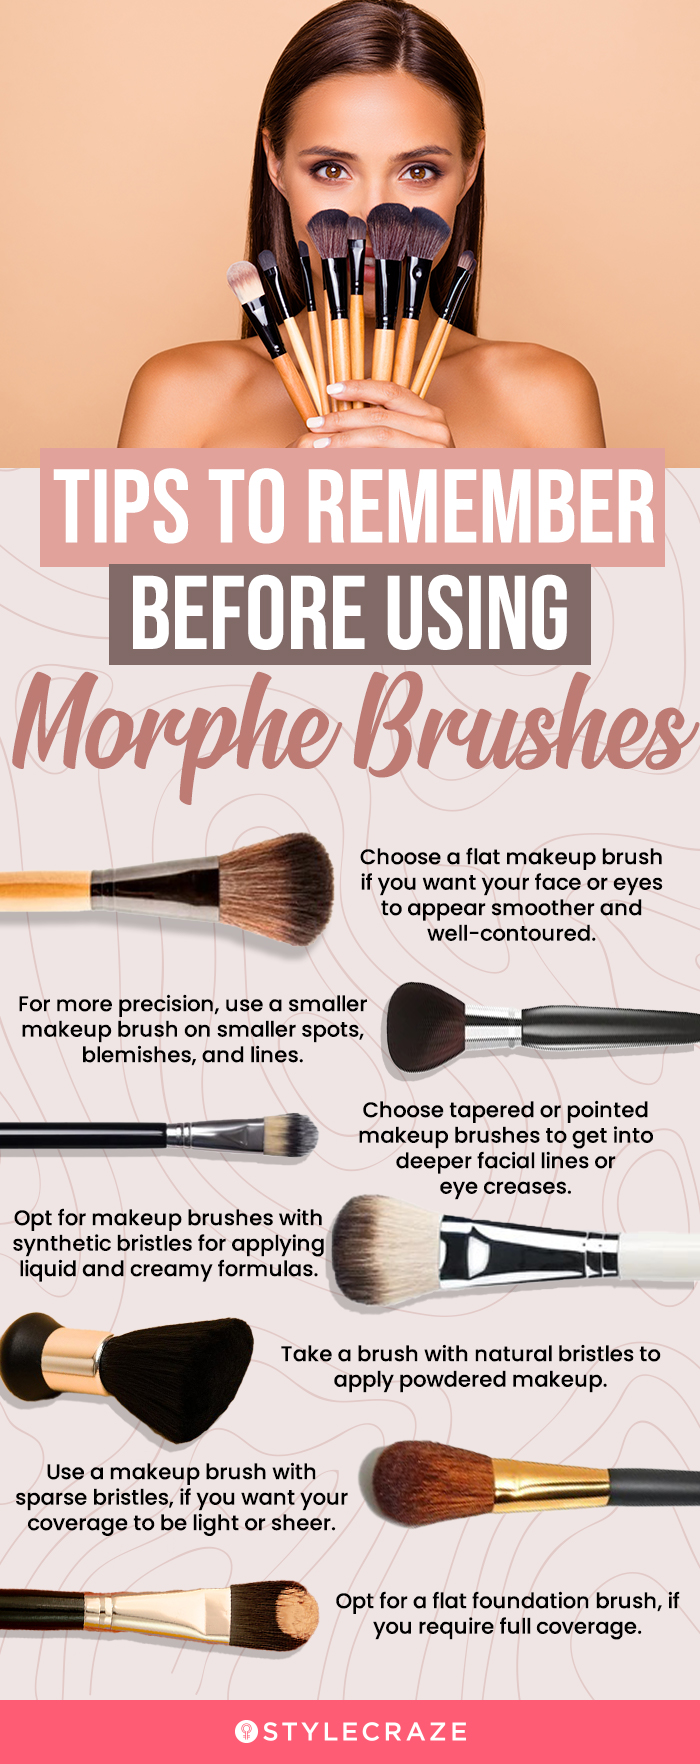 Tips To Remember Before Using Morphe Brushes (infographic)